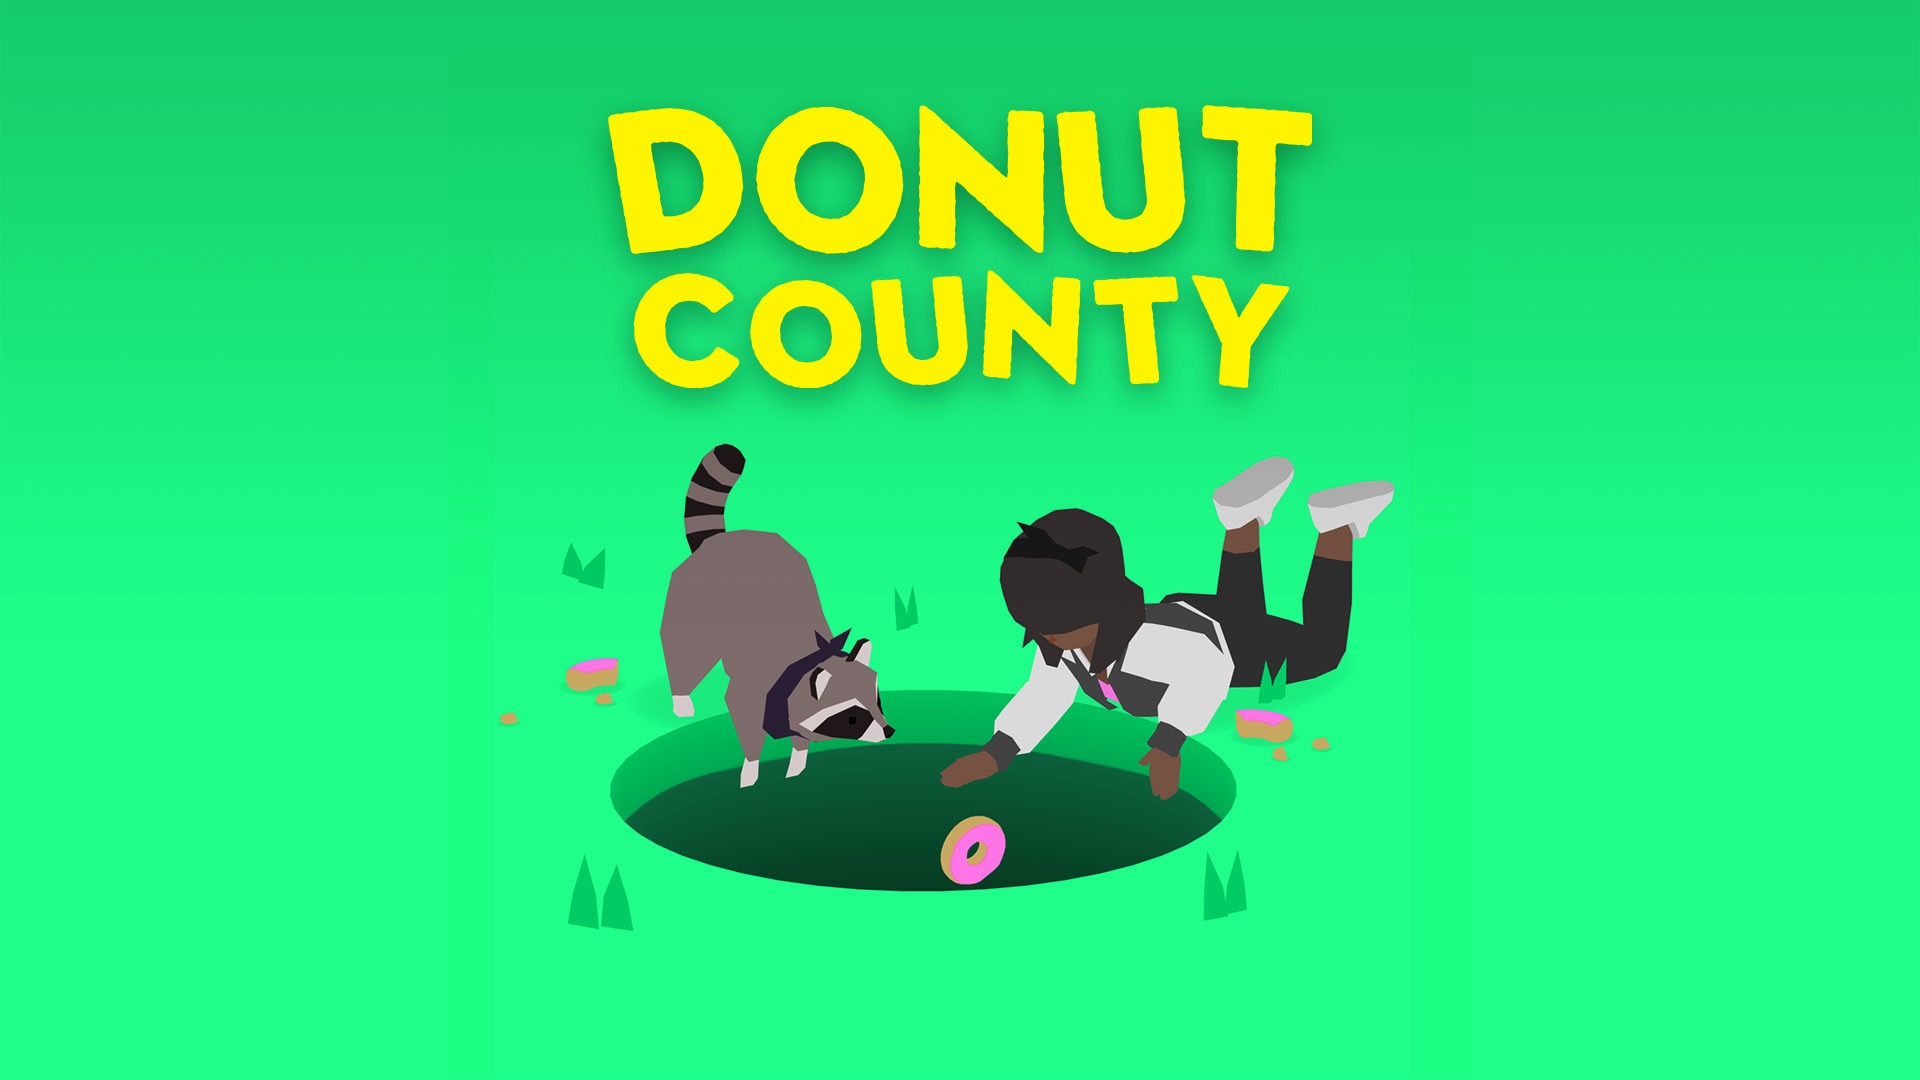 download donut county online for free